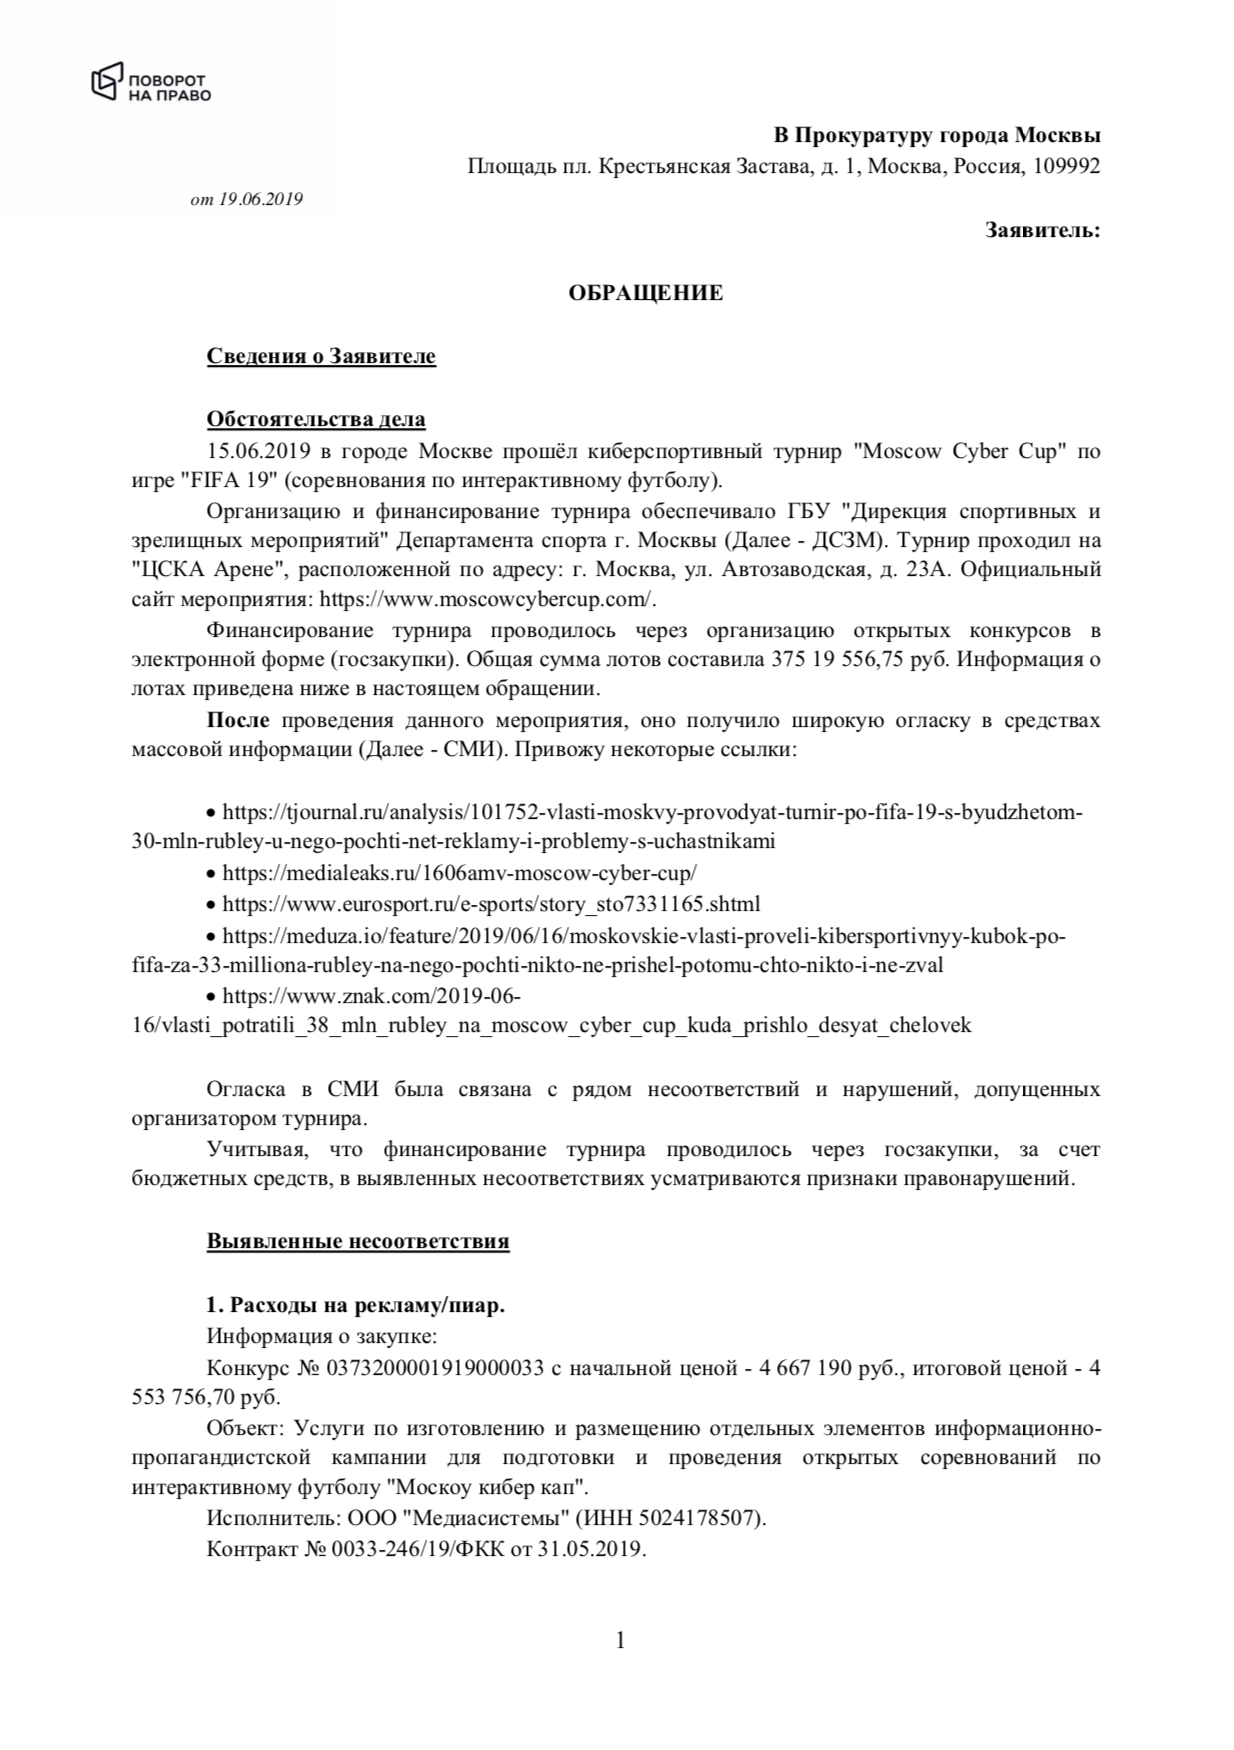 A complaint was filed with the Moscow Prosecutor's Office against the organizers of the Moscow Cyber ??Cup eSports tournament - My, news, Lawyers, A complaint, Prosecutor's office, Money, Longpost, FIFA 19, eSports, Negative